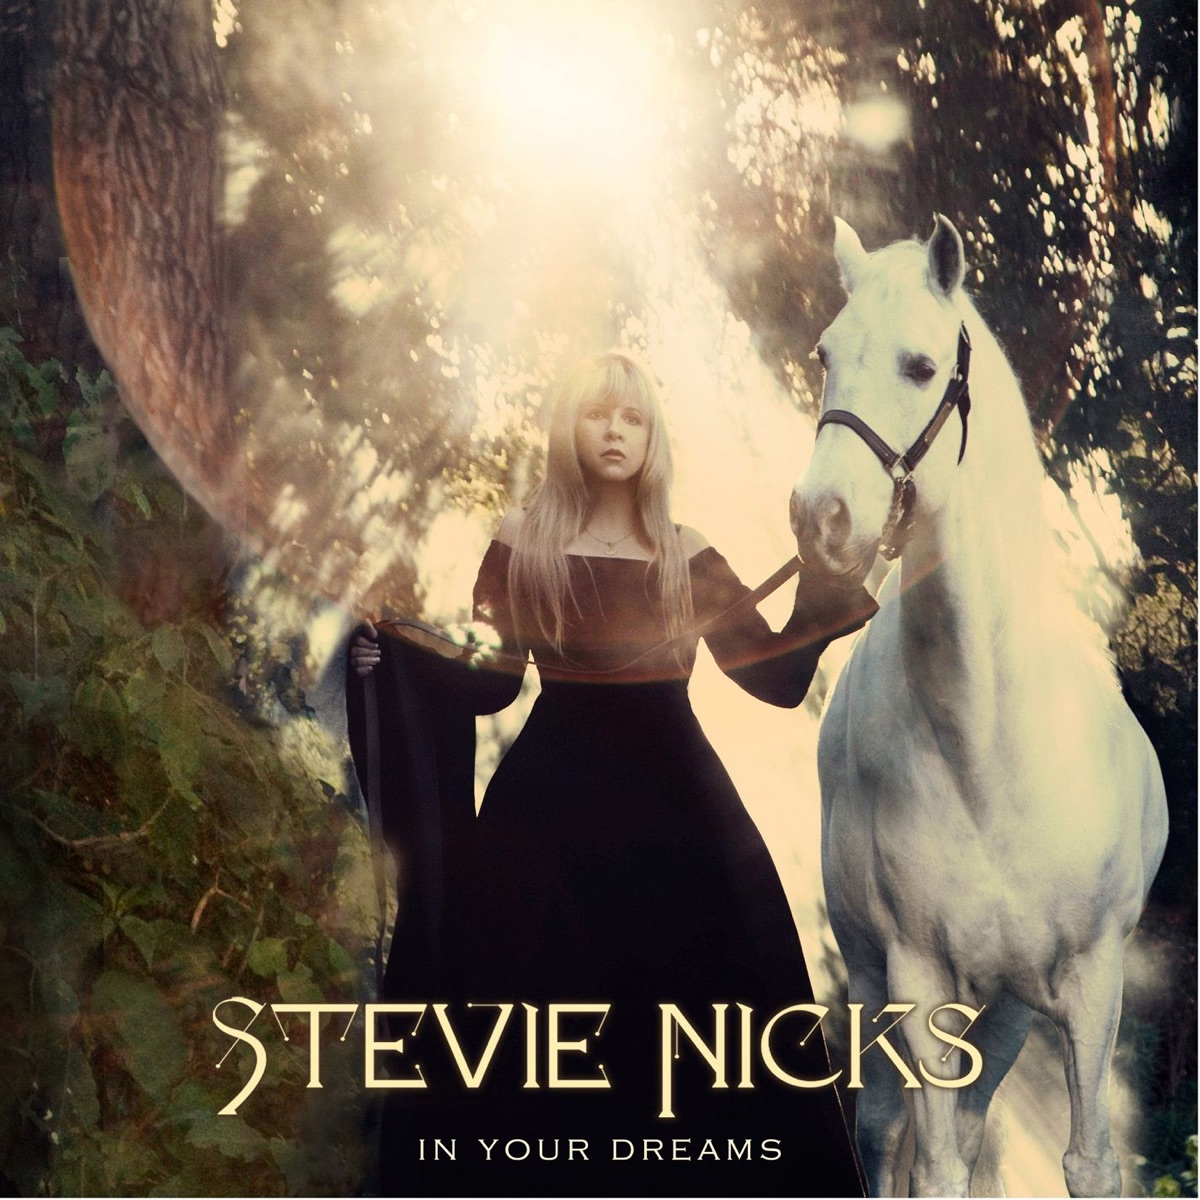 In Your Dreams (Deluxe Version) by Stevie Nicks on Apple Music